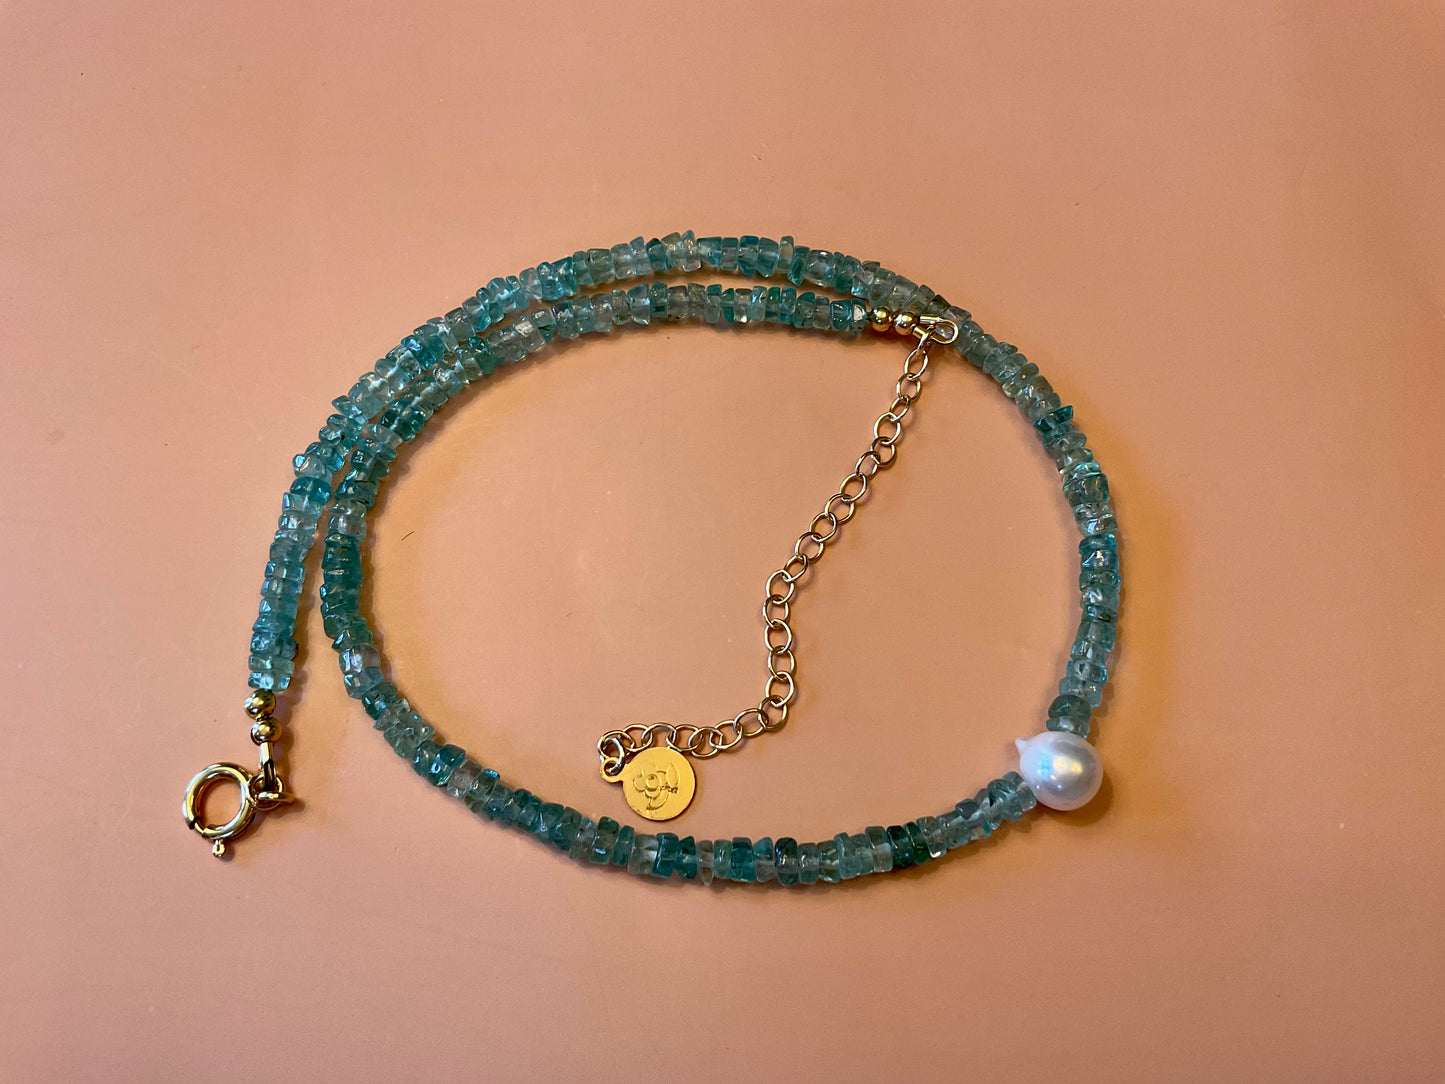 Blue Apatite Necklace with Pearl